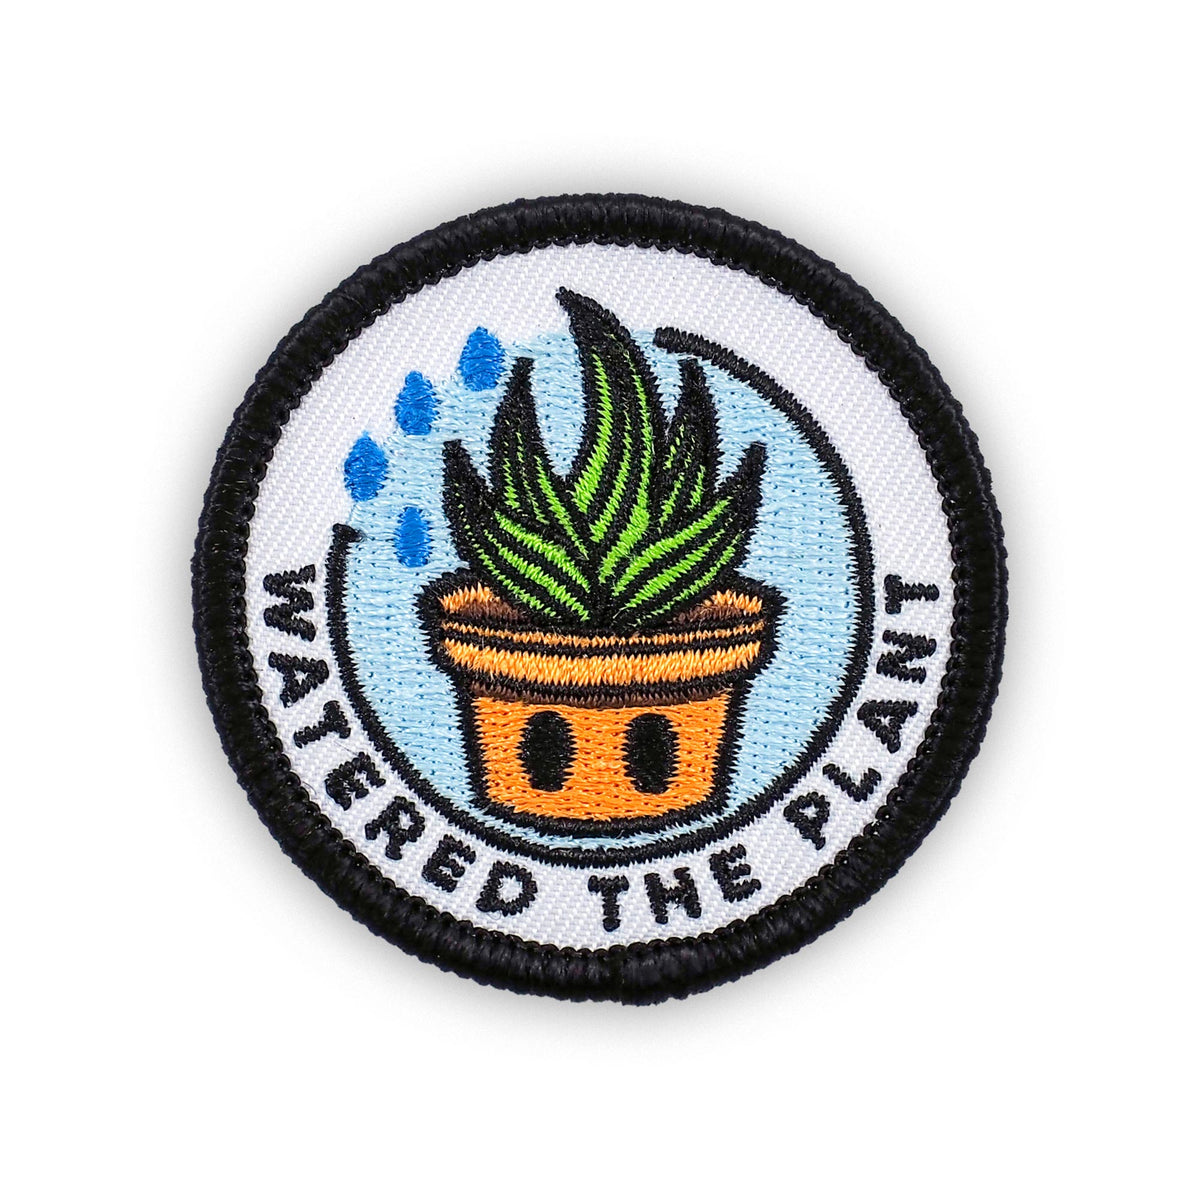 Watered The Plant individual adulting merit badge patch for adults